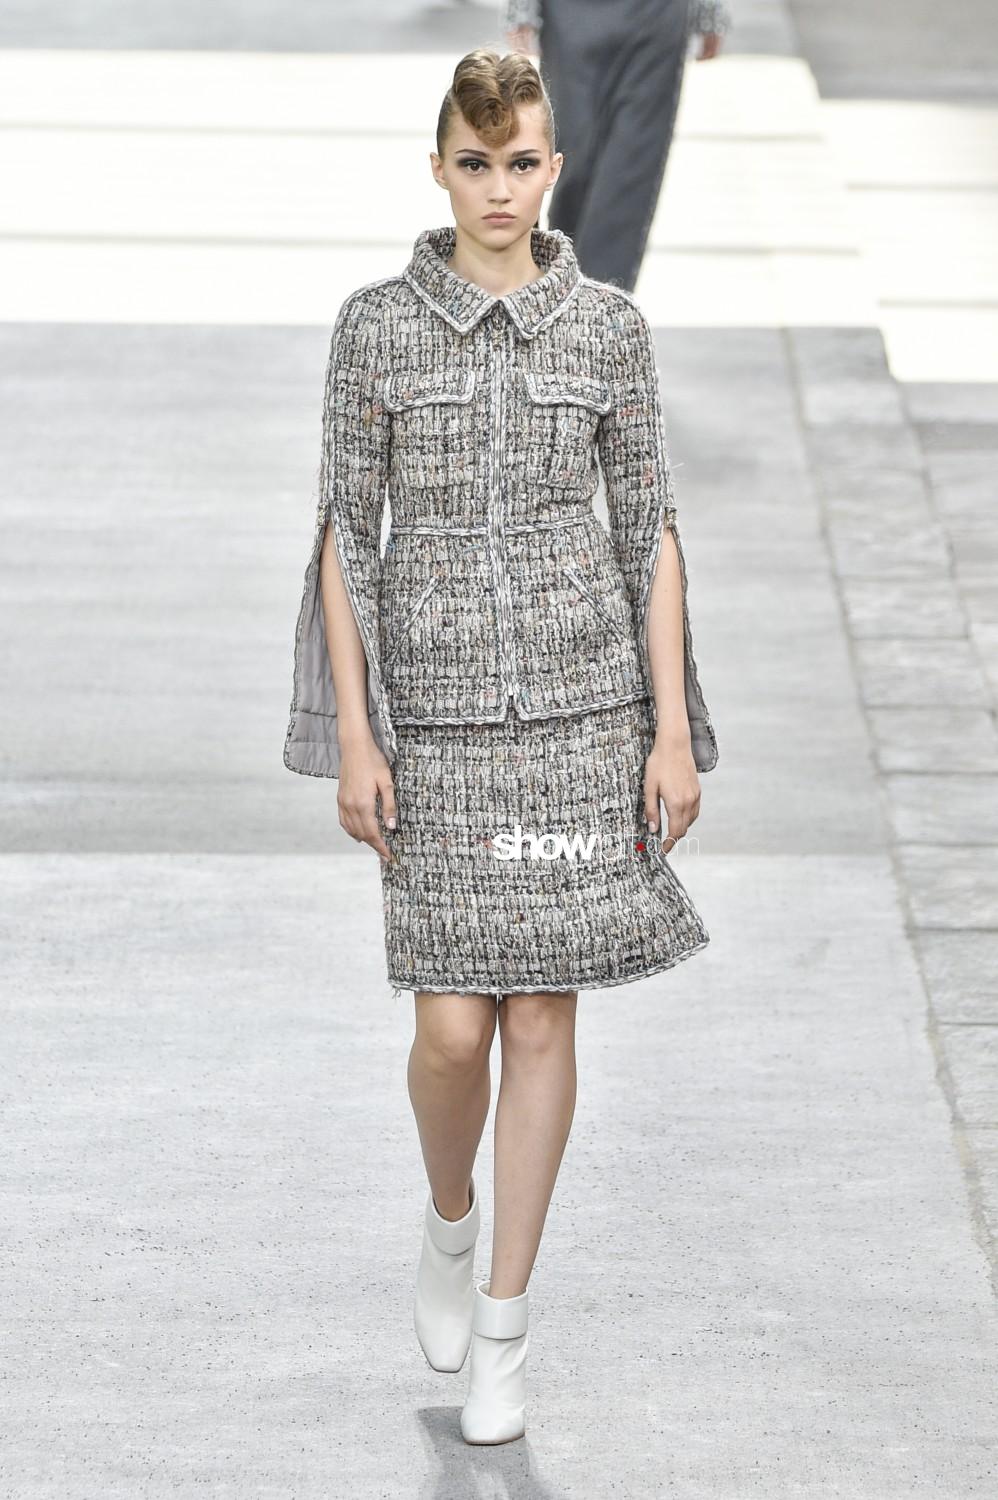 Chanel haute couture show is a postcard from idealised Paris, Chanel